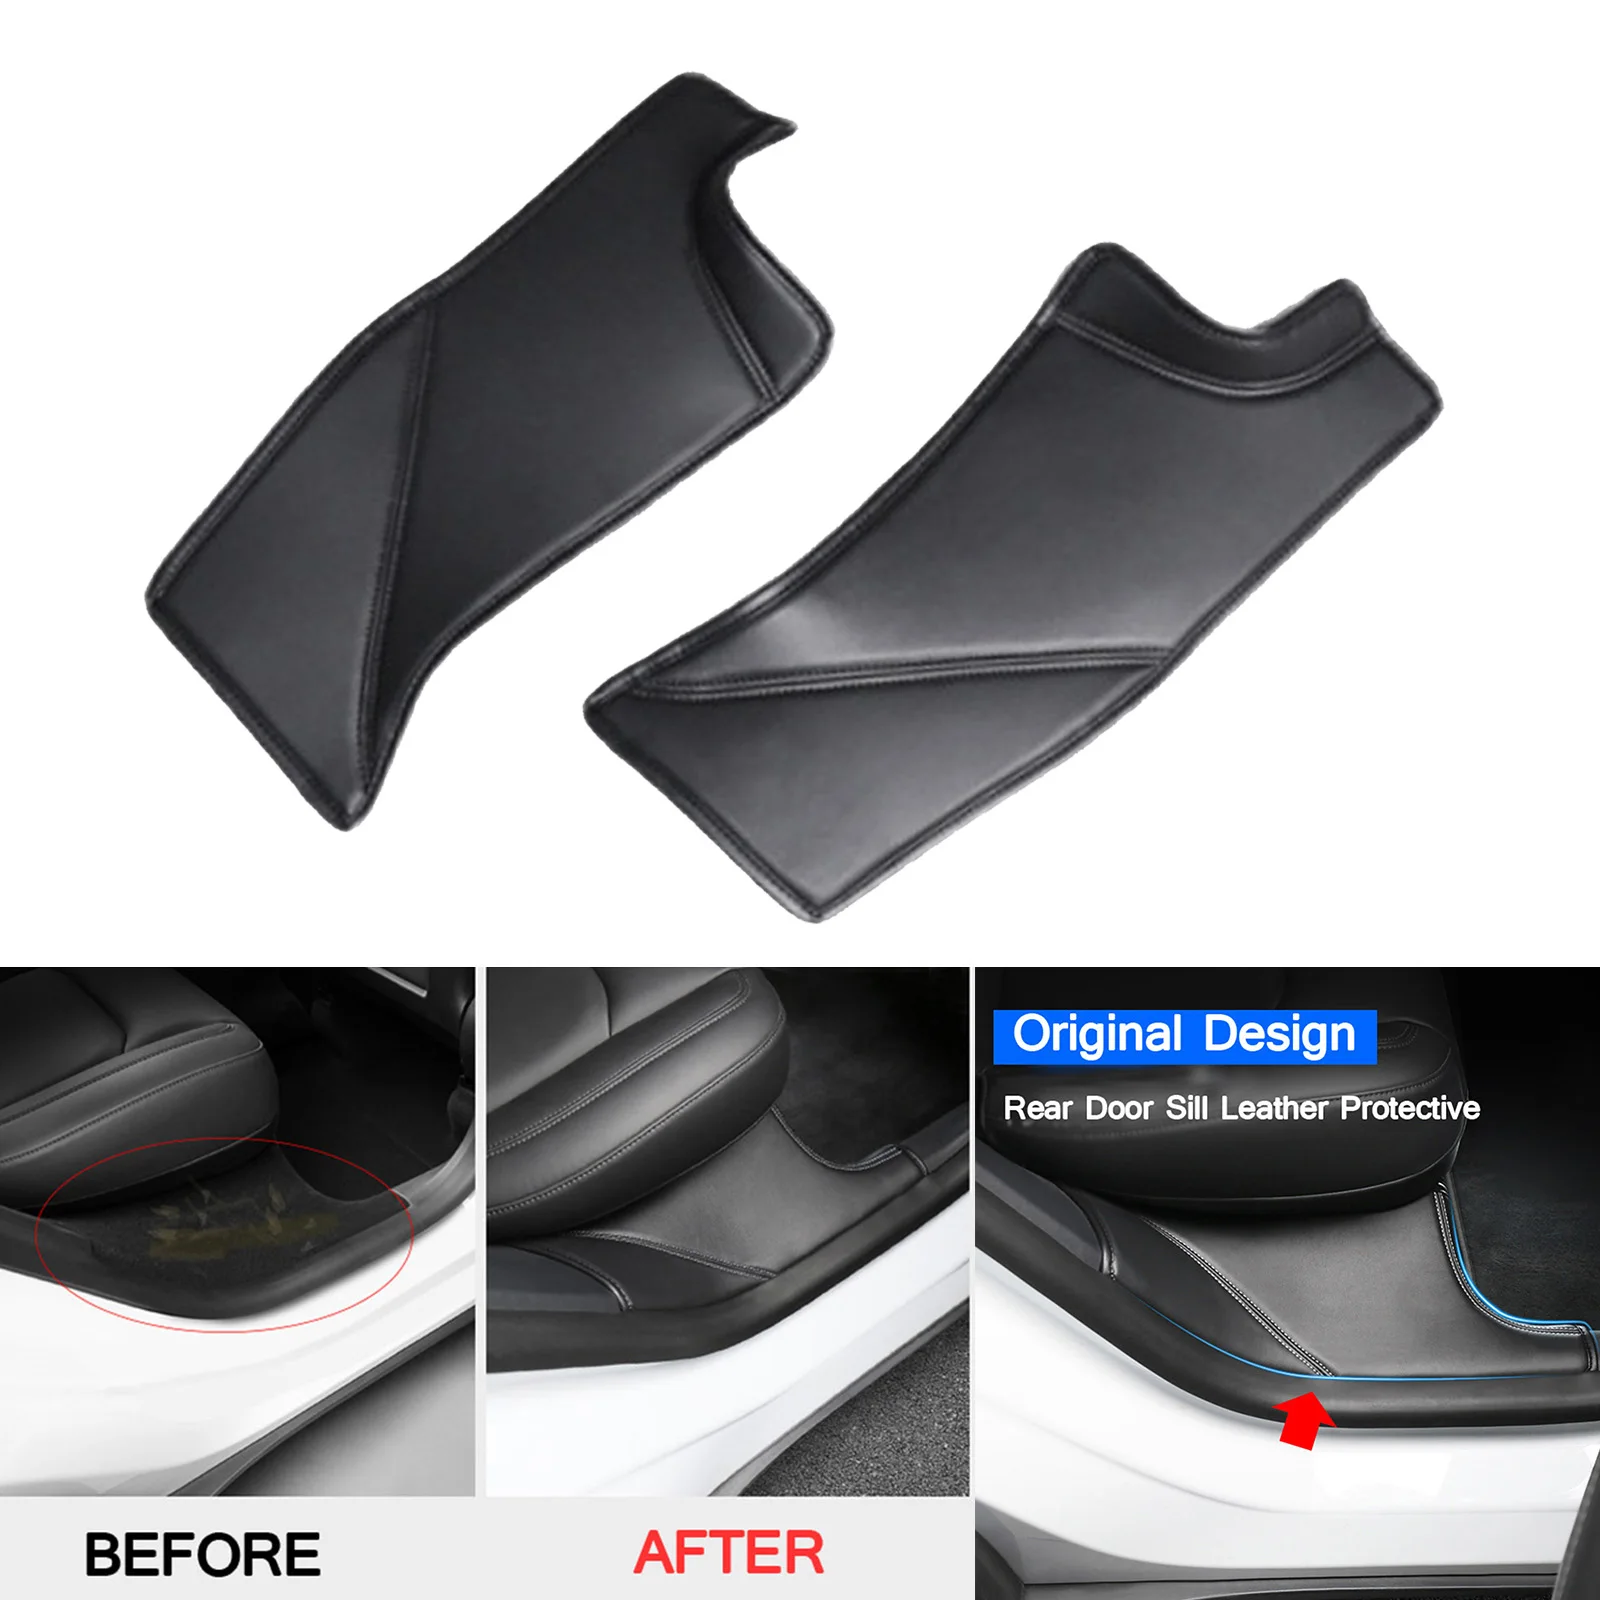 2x Car Rear Door Sill Protector Cover For  , PU Leather